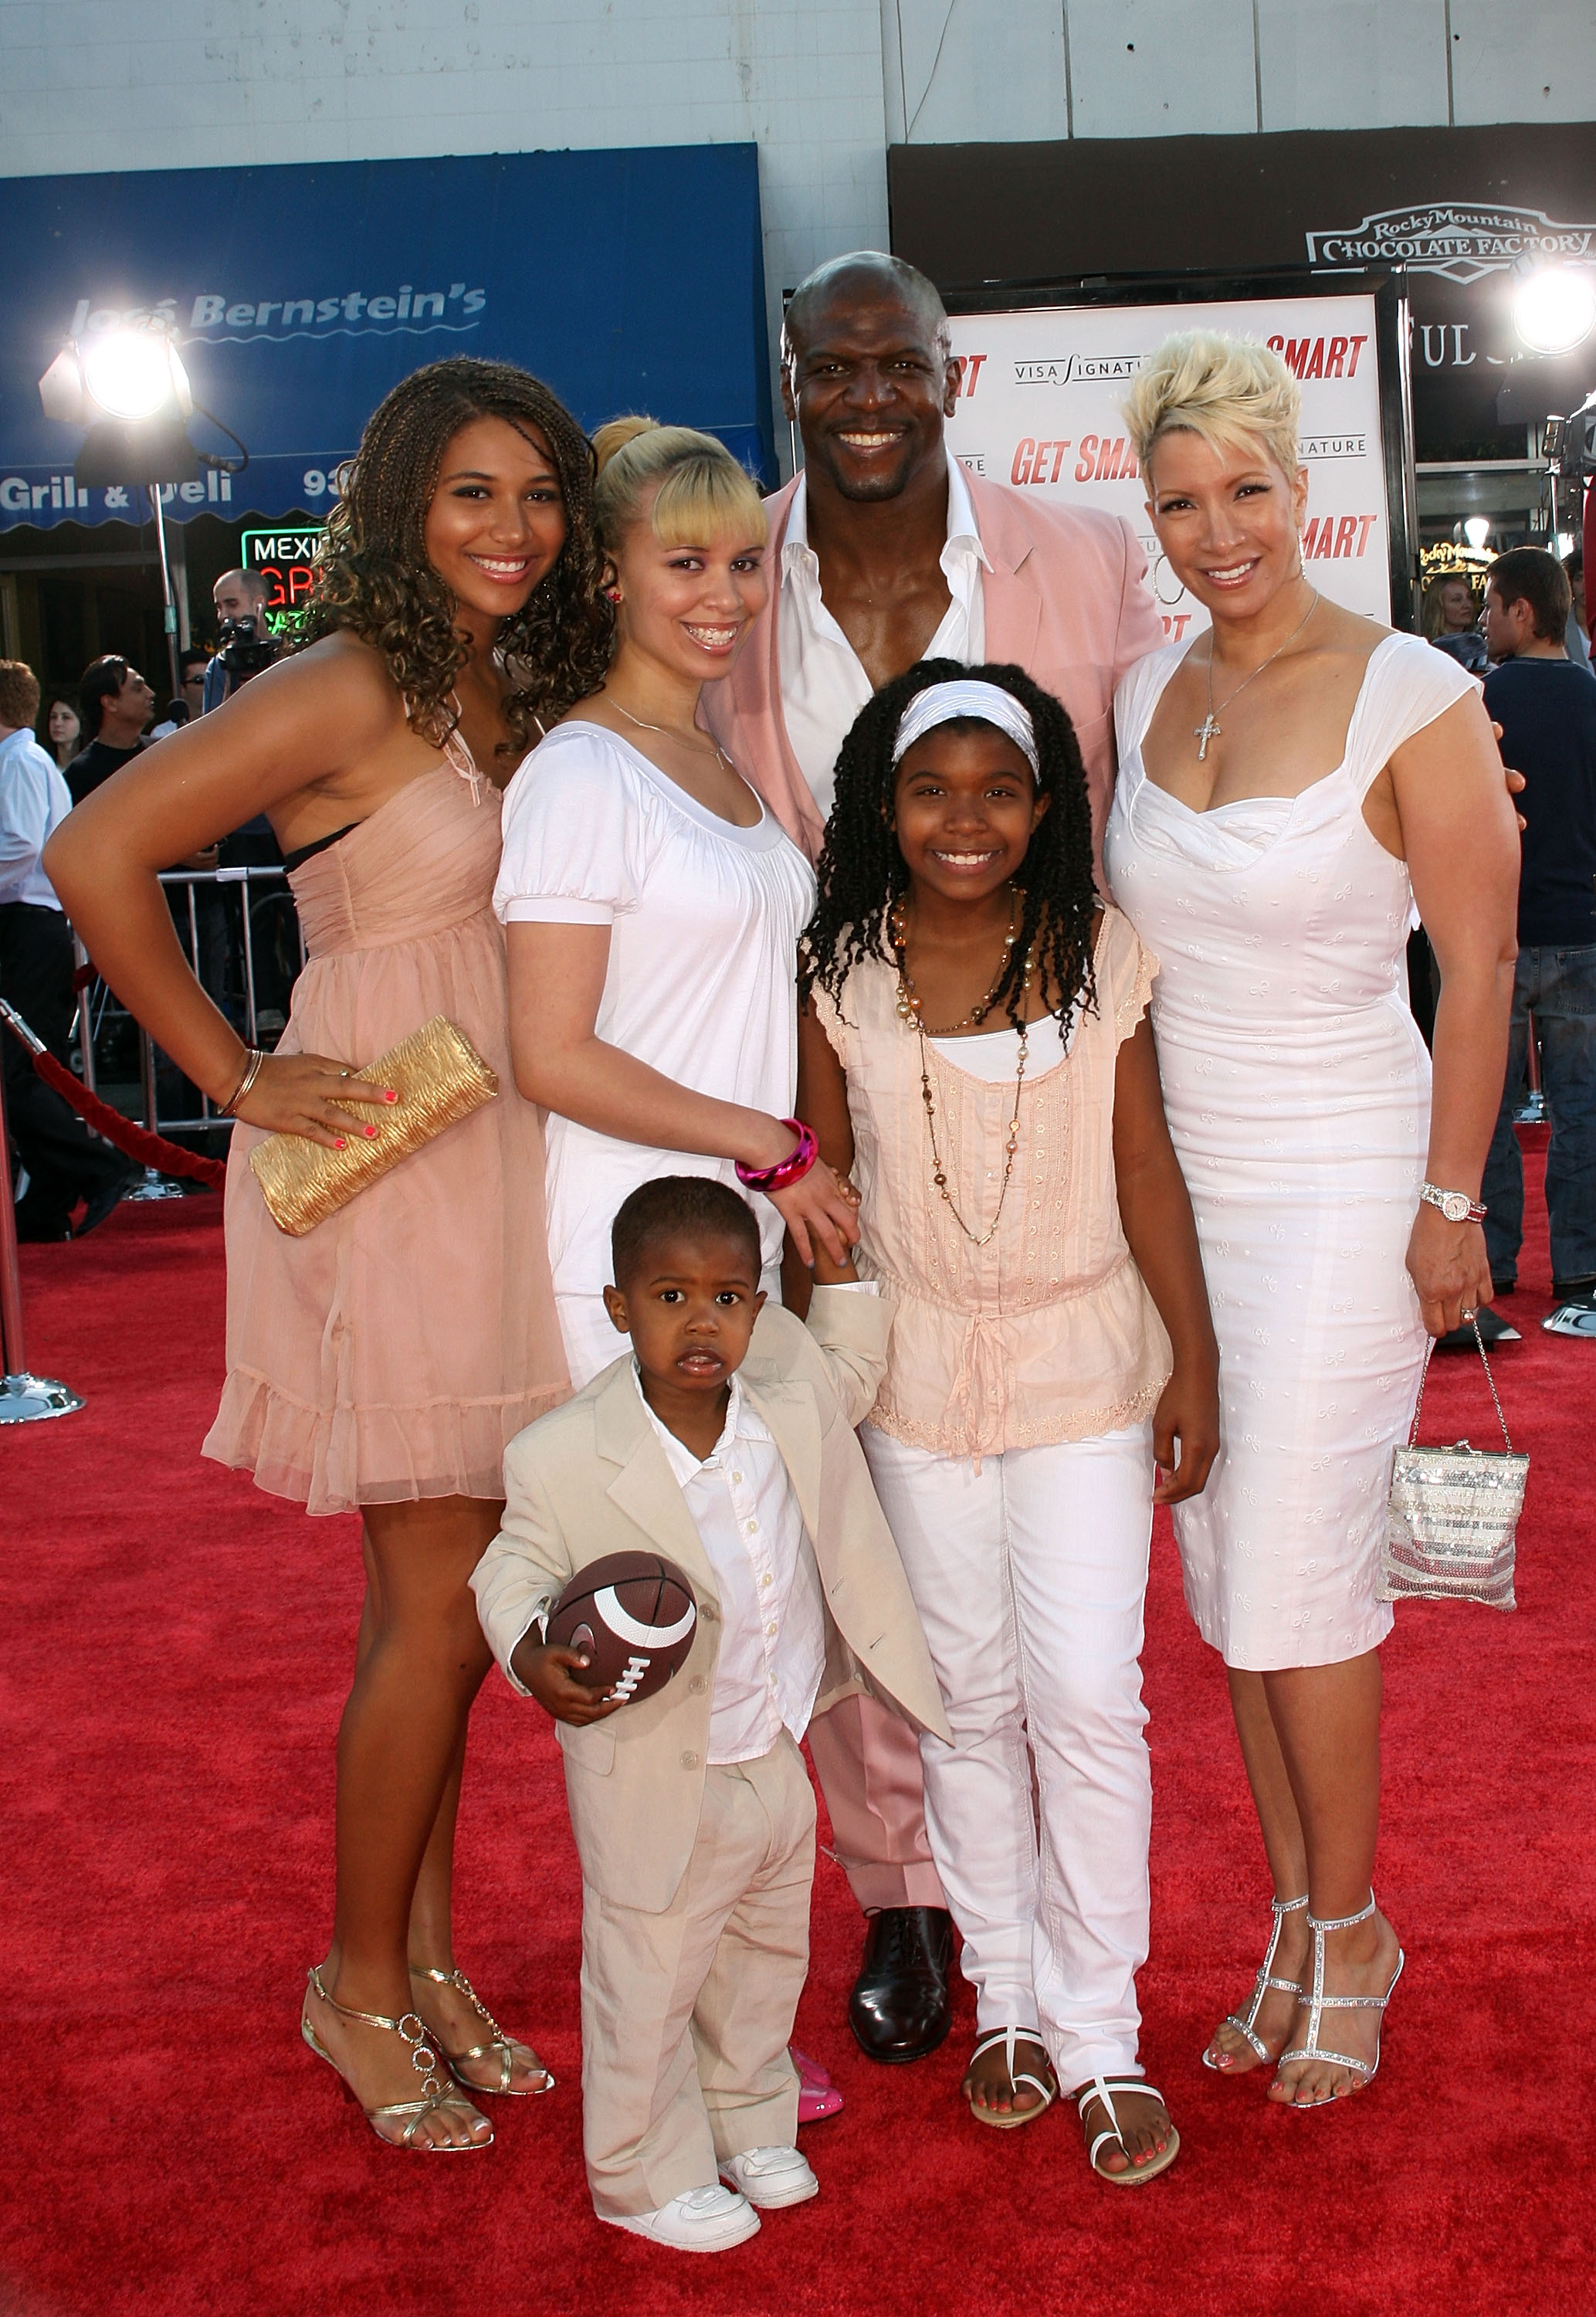 Terry Crews and Rebecca King-Crews with their kids at the world premiere of "Get Smart" in Westwood, California on June 16, 2008 | Source: Getty Images